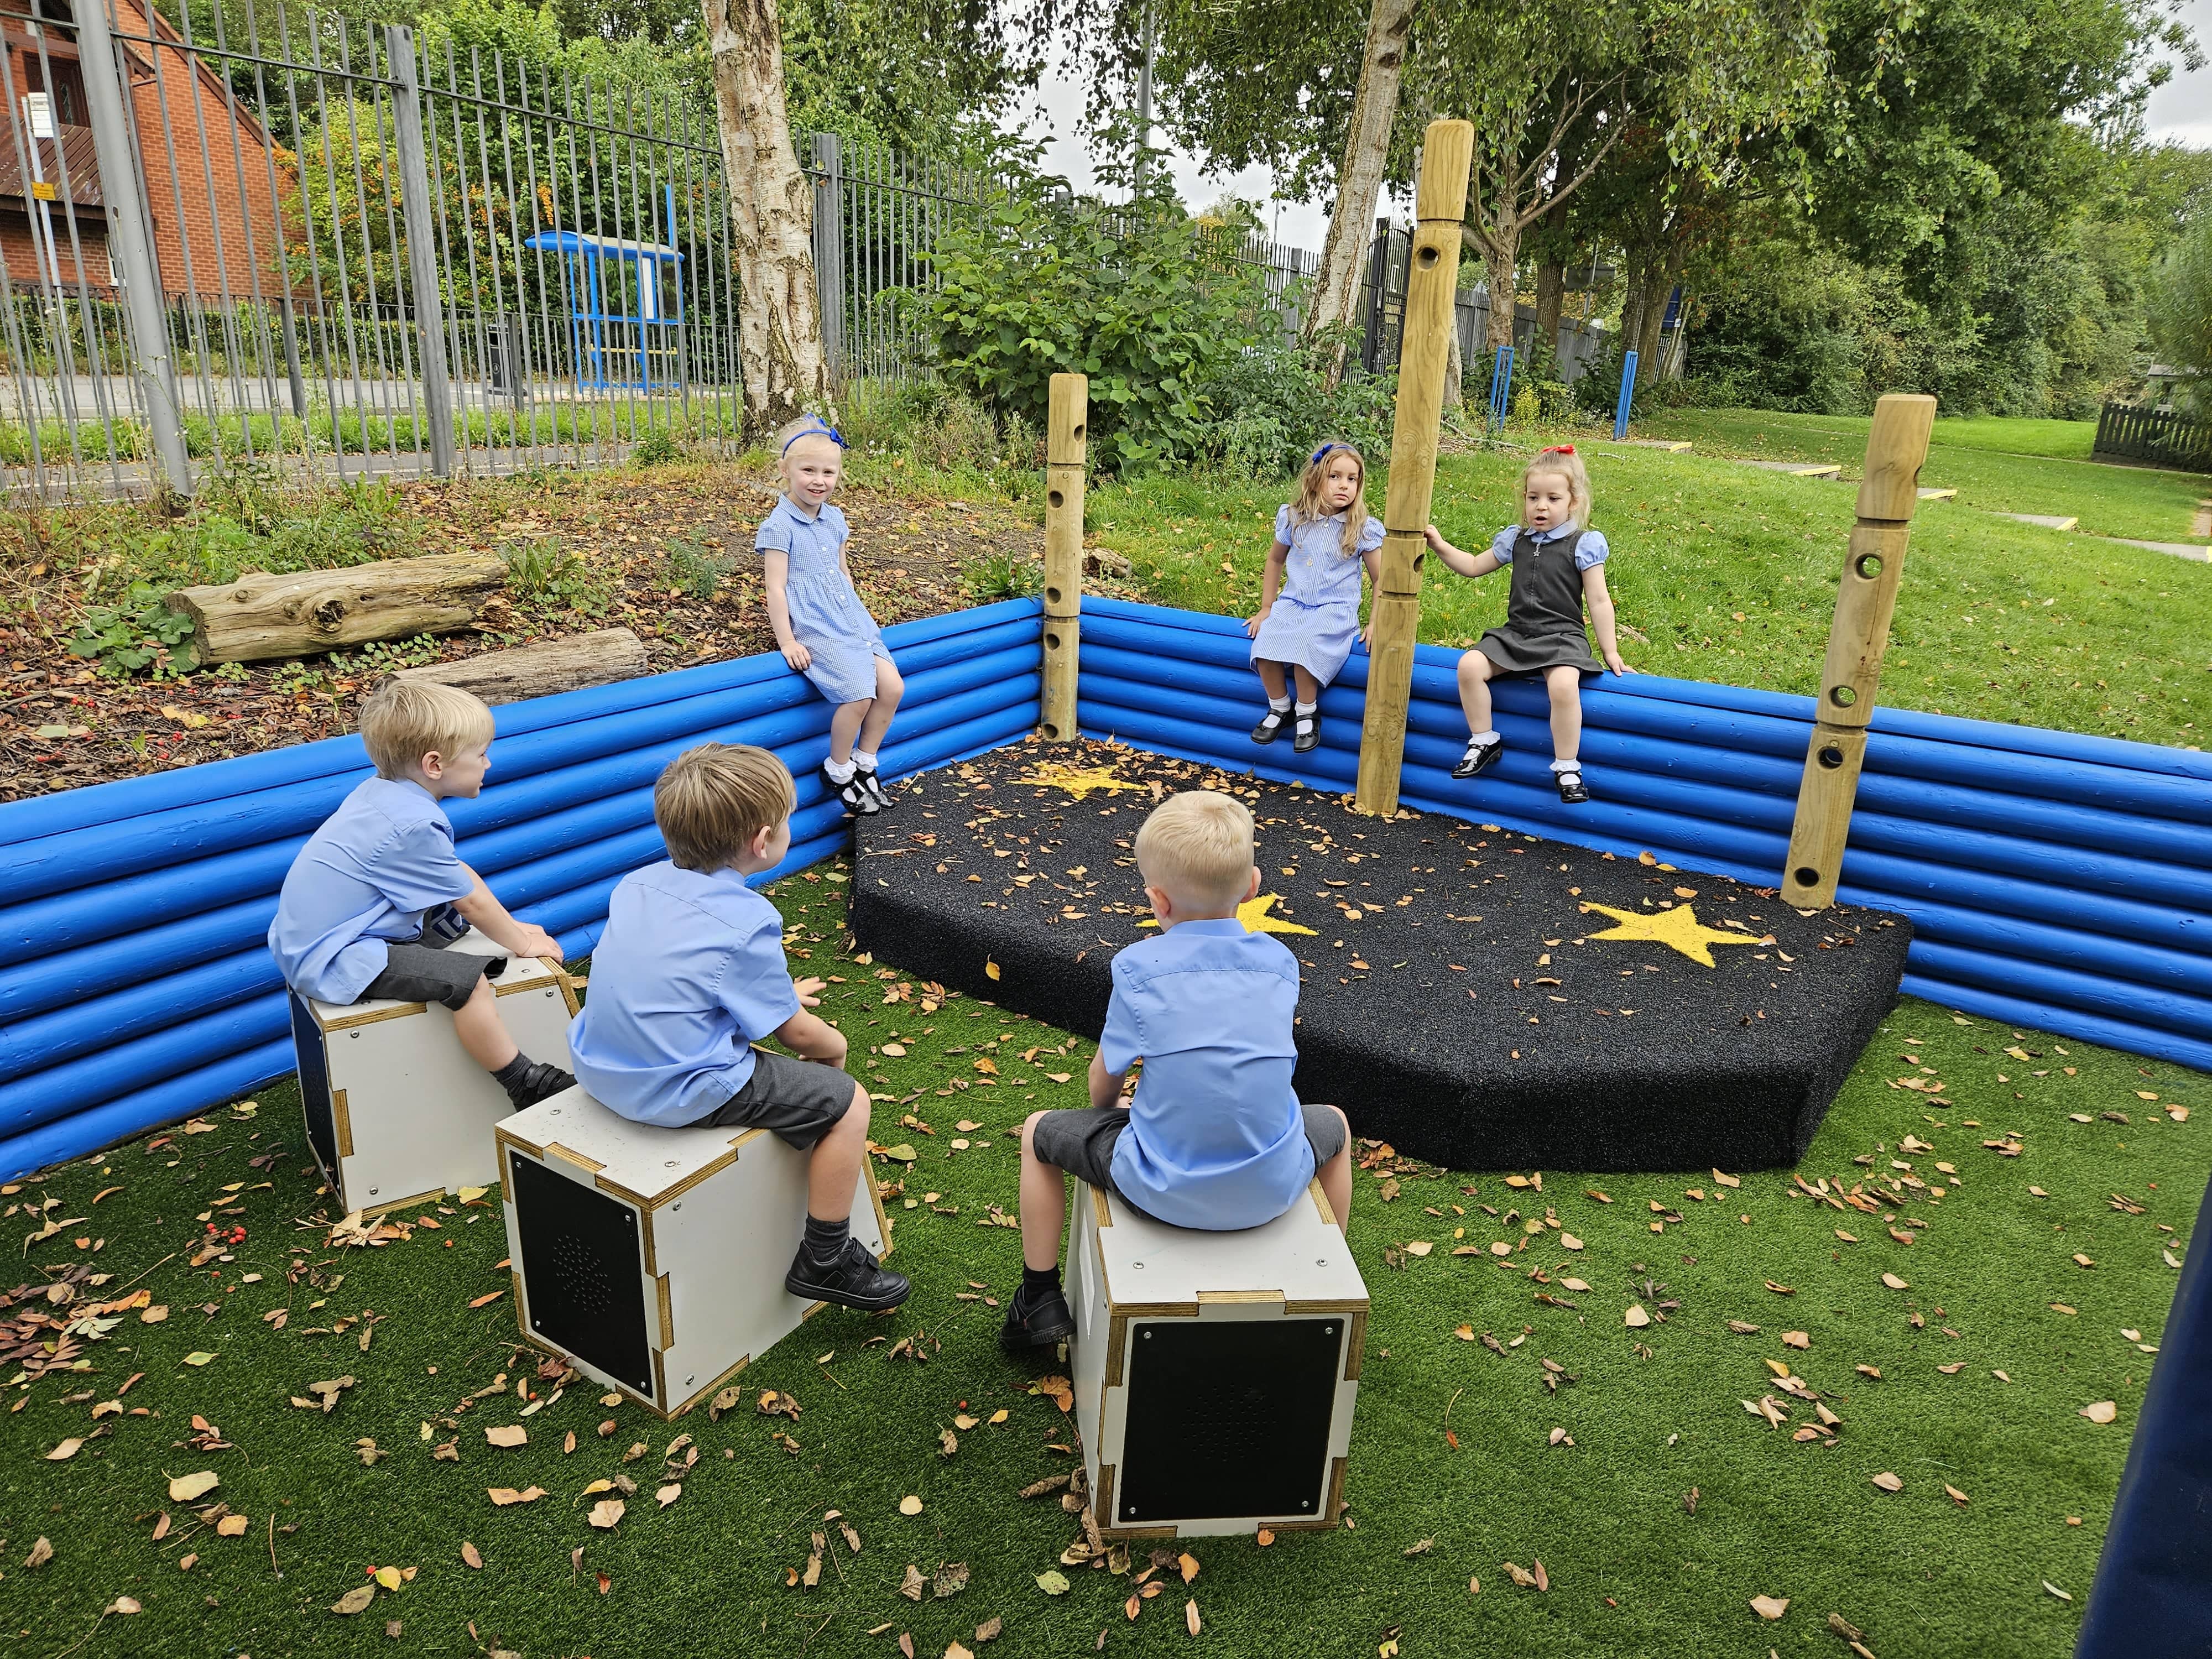 6 children are playing with the outdoor Performance Stage with Den Posts. The Performance Stage is black with star patterns on it and 3 children are sat on the fence that is behind it.